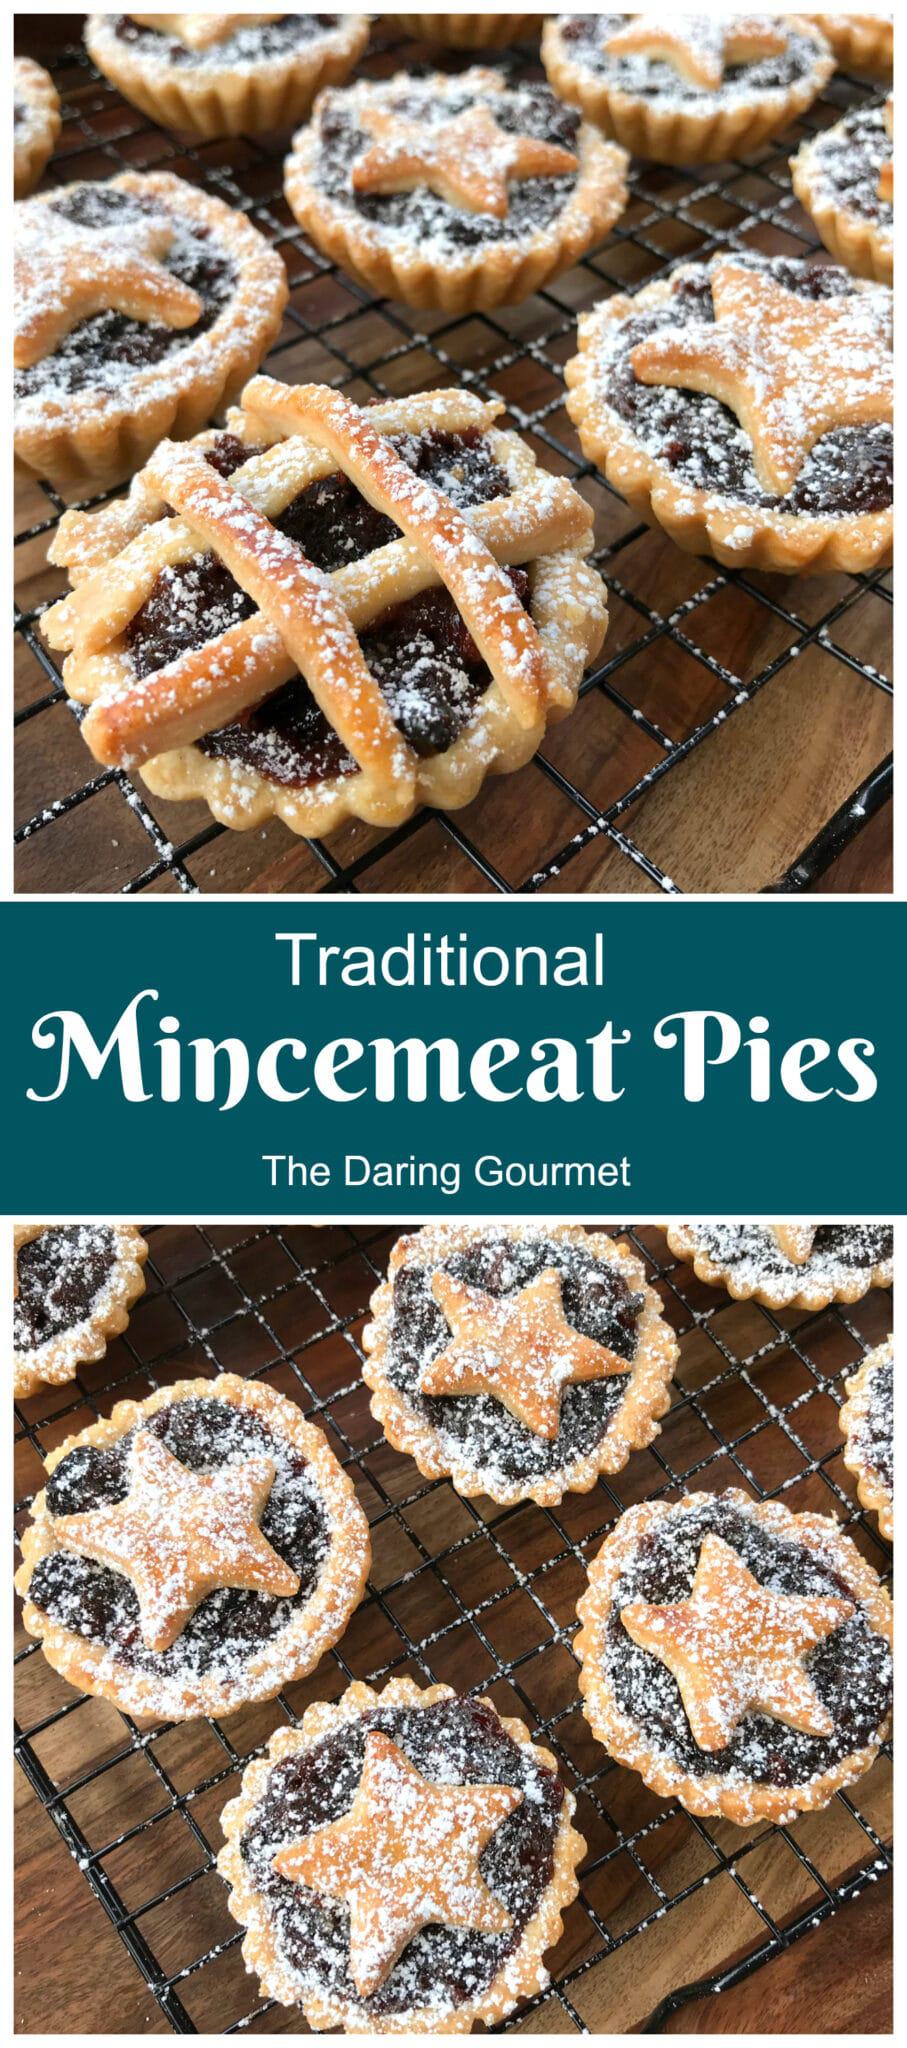 mincemeat pie recipe mince pie best traditional authentic British English from scratch